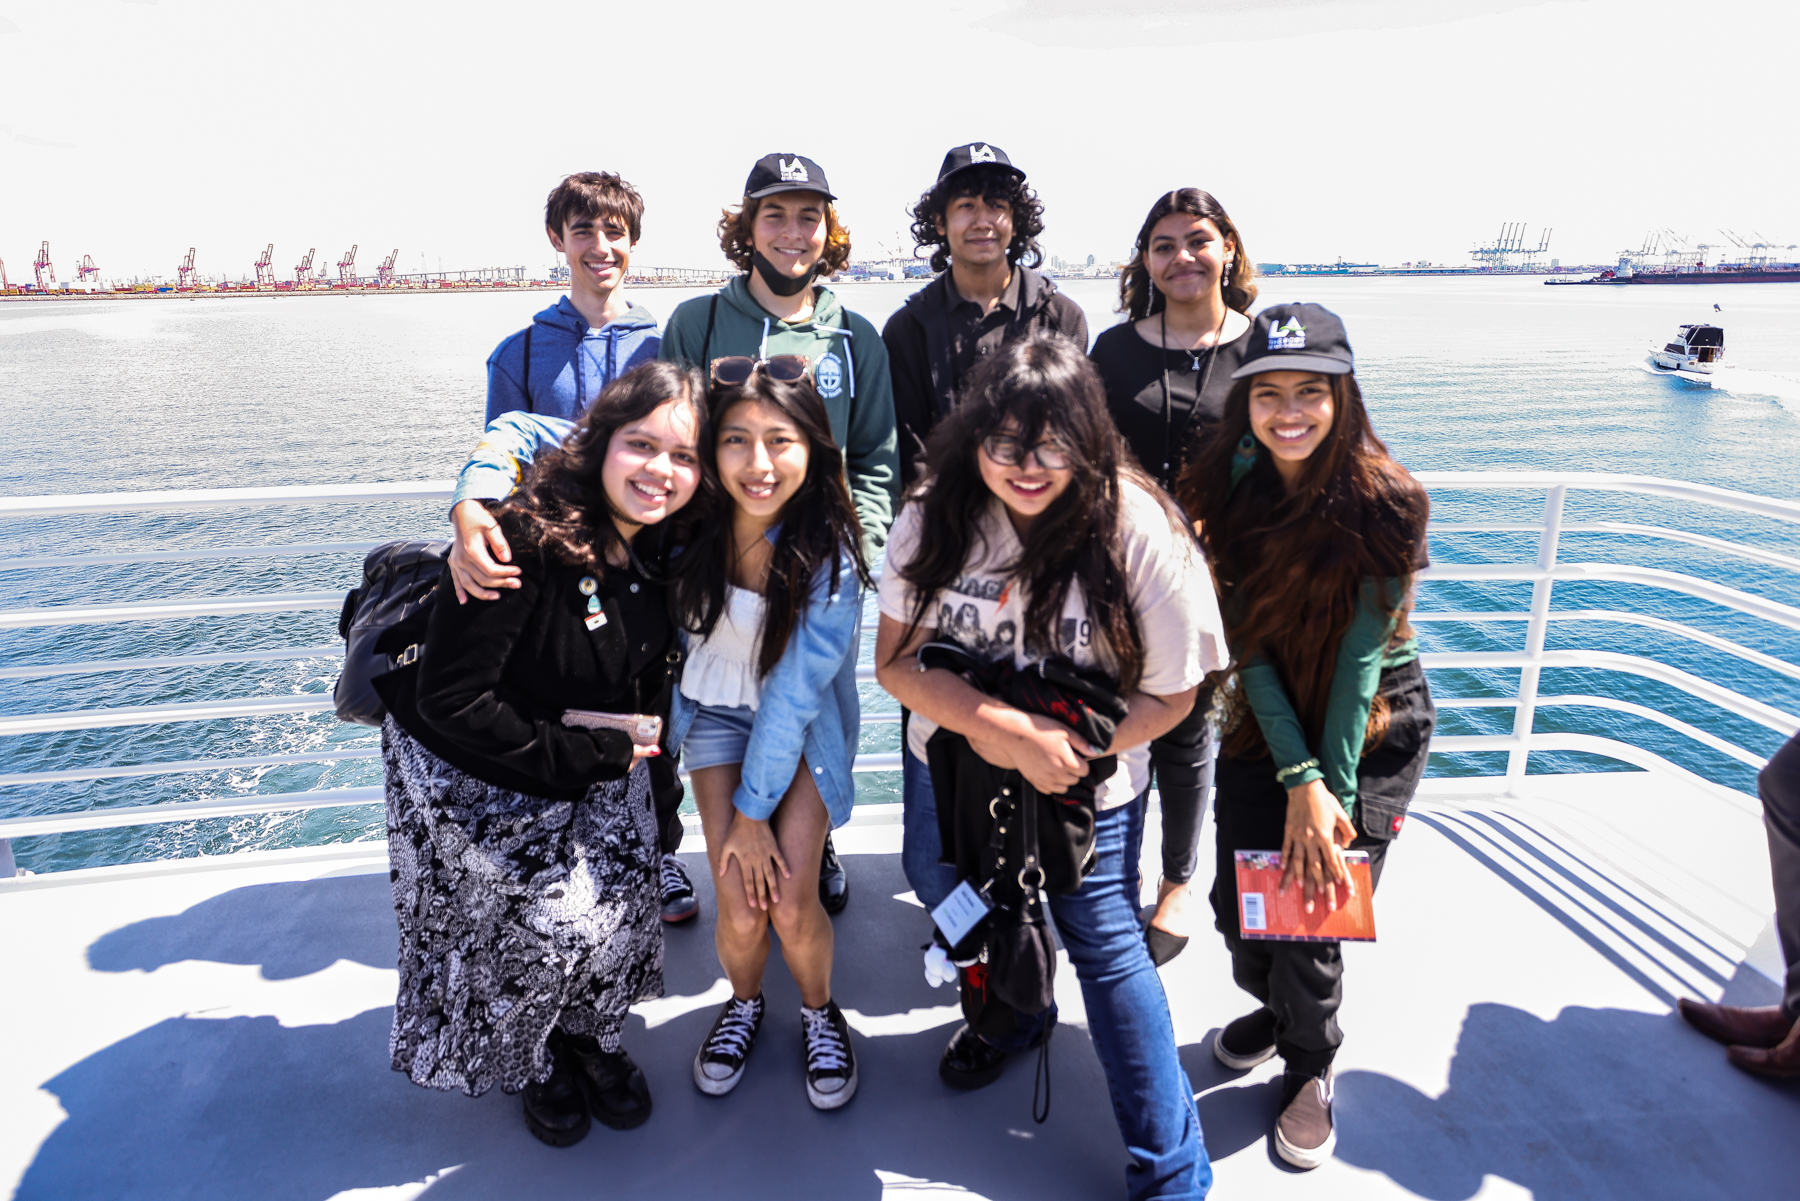 A photo of 8 students on the upper deck of a boat with San Pedro Bay and port drayage equipment in the background